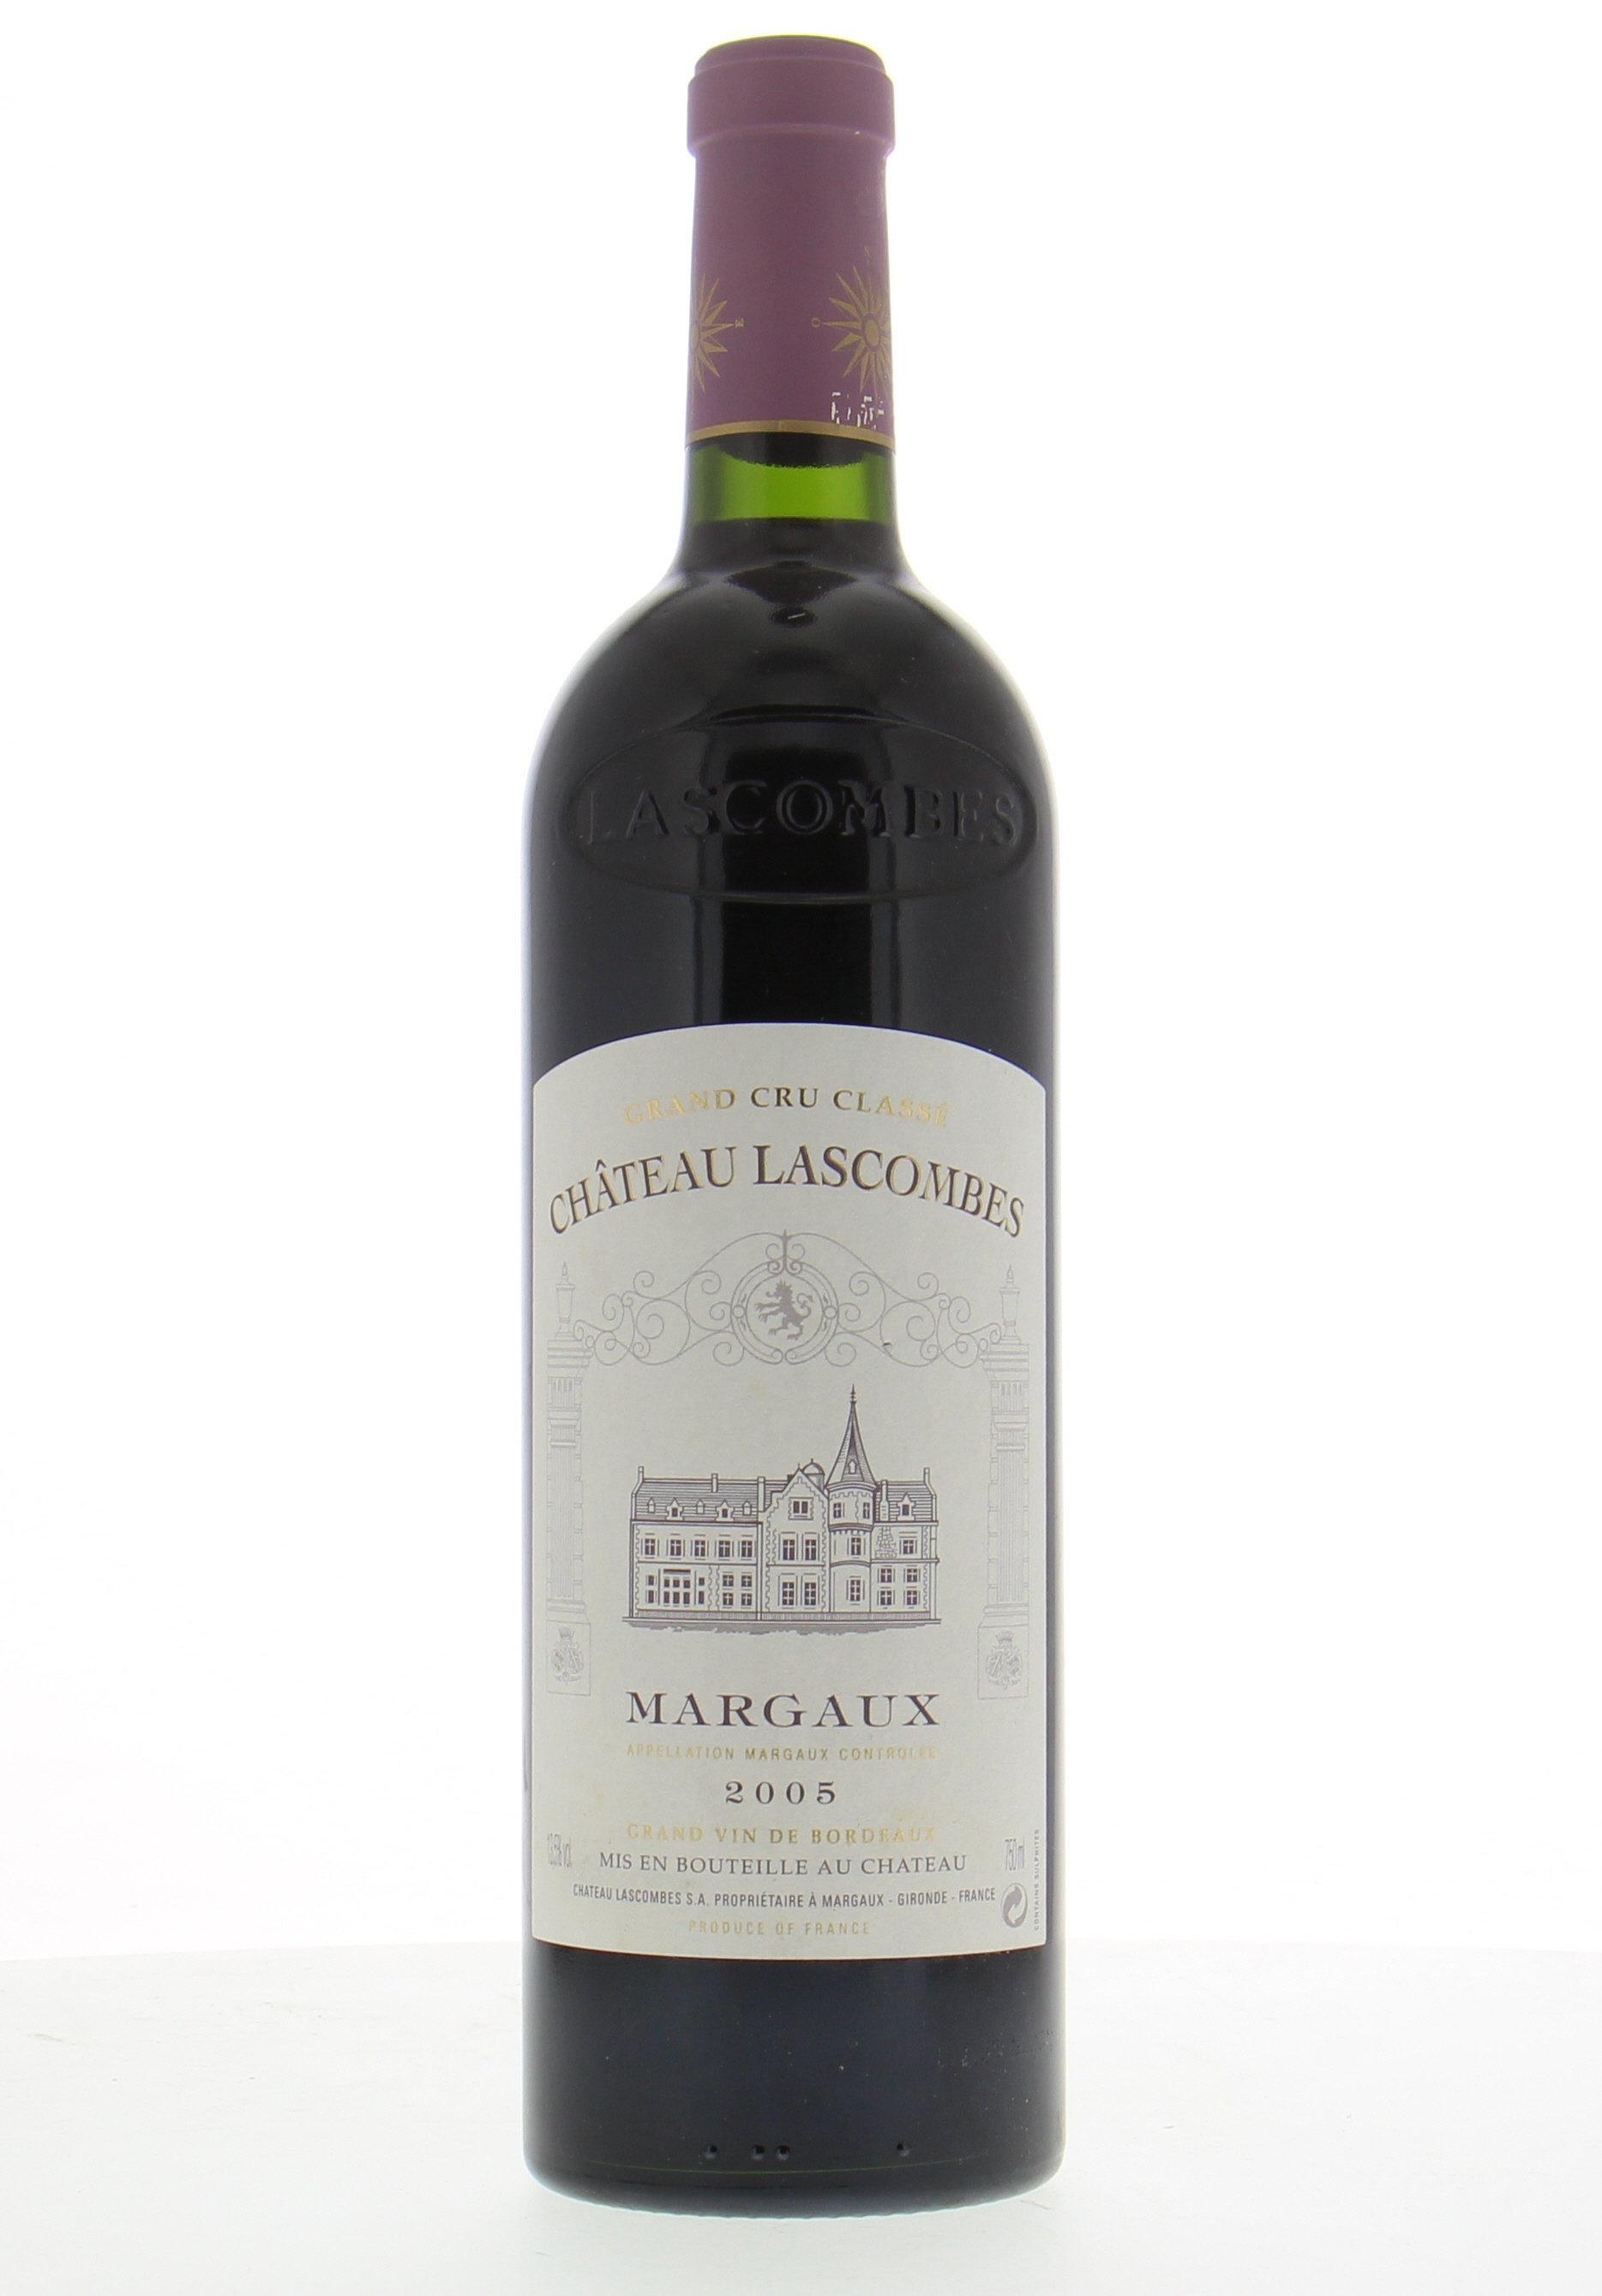 Chateau Lascombes - Chateau Lascombes 2005 perfect